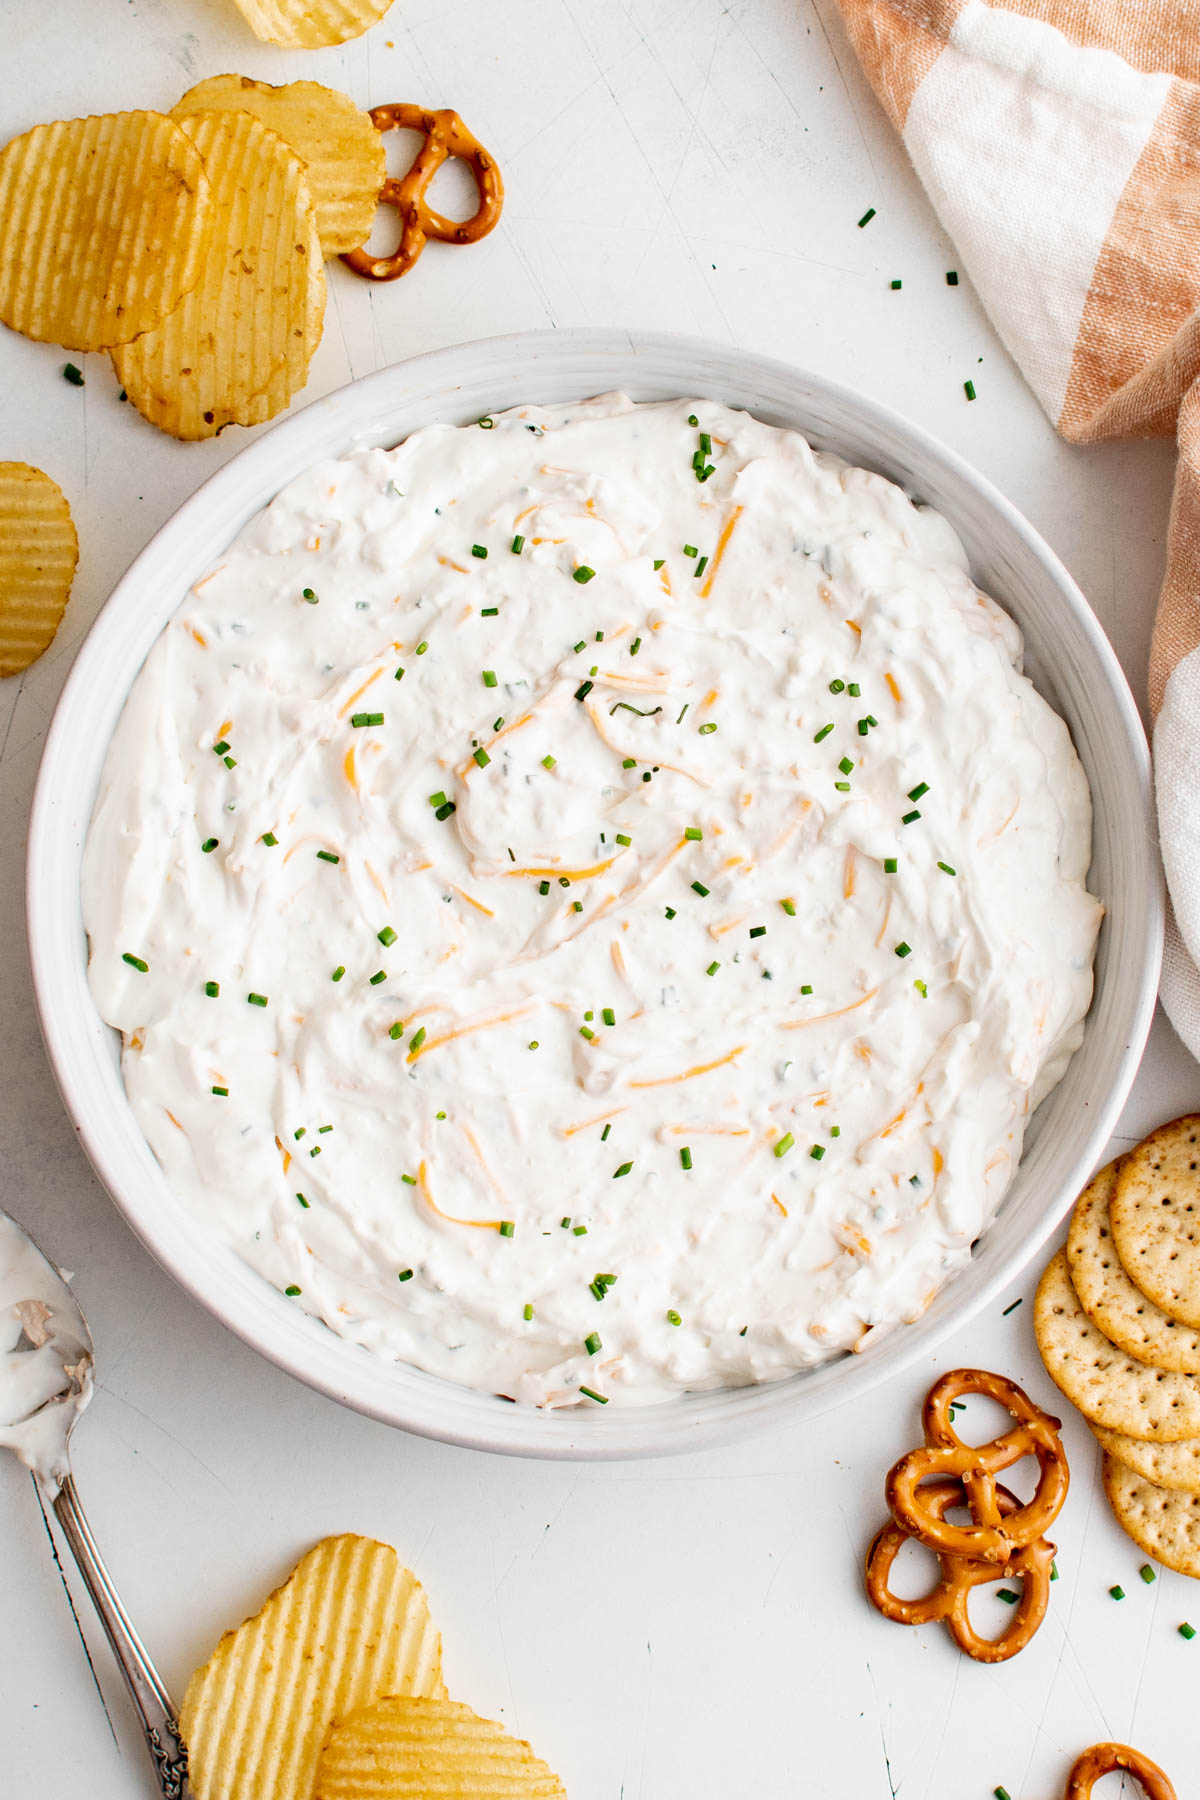 Cream cheese dip in a bowl with chives garnish.